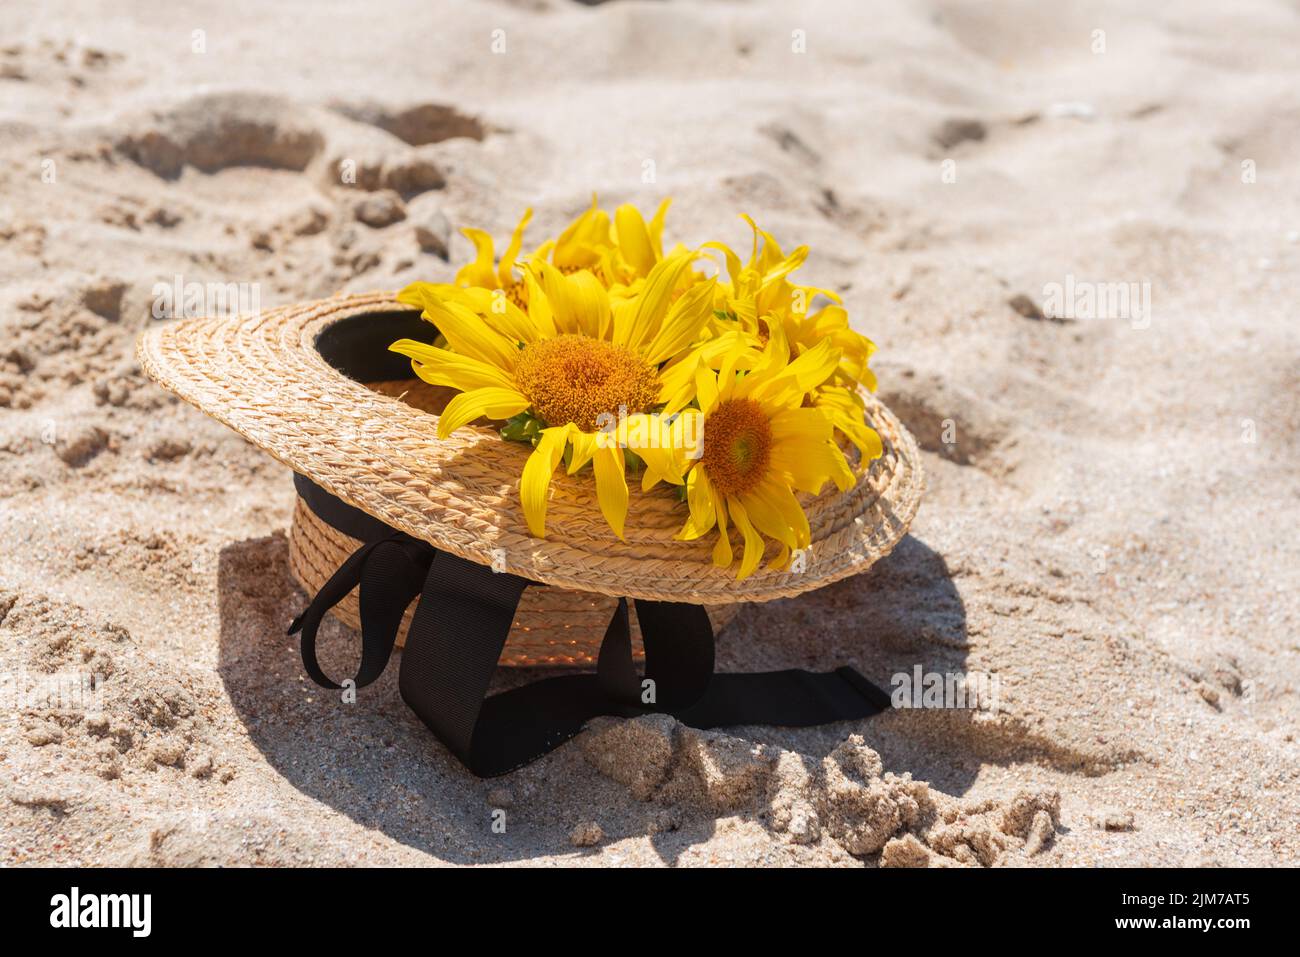 Straw boater hats hi-res stock photography and images - Alamy